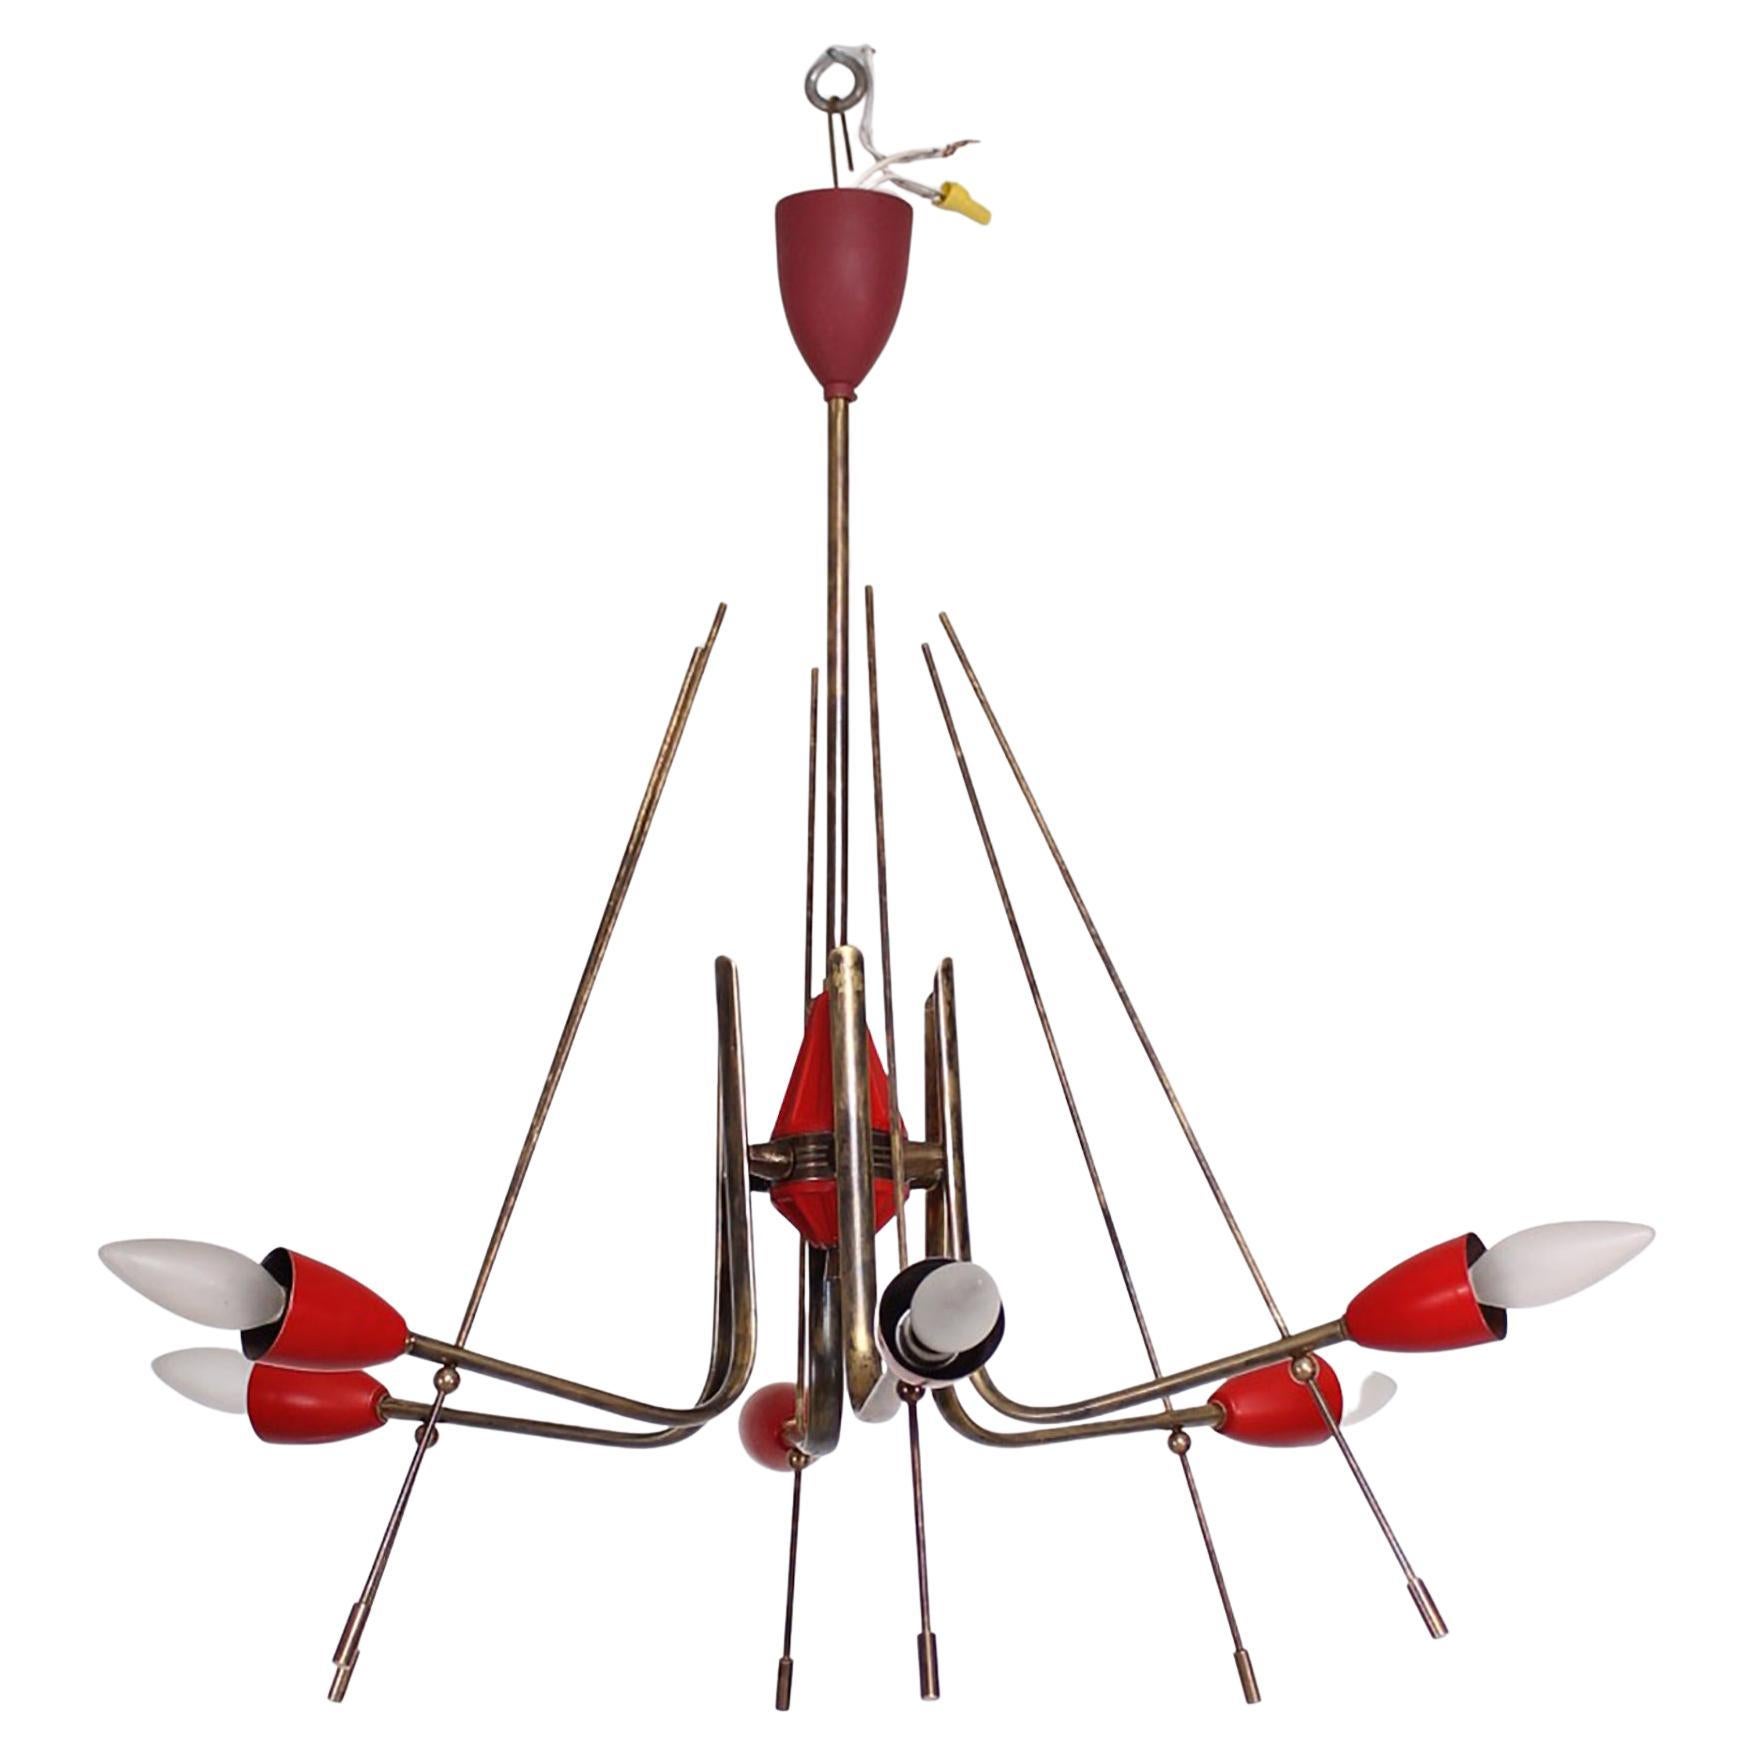 STILNOVO Atomic Futuristic Solid Brass Chandelier Painted Red Italy 1950s